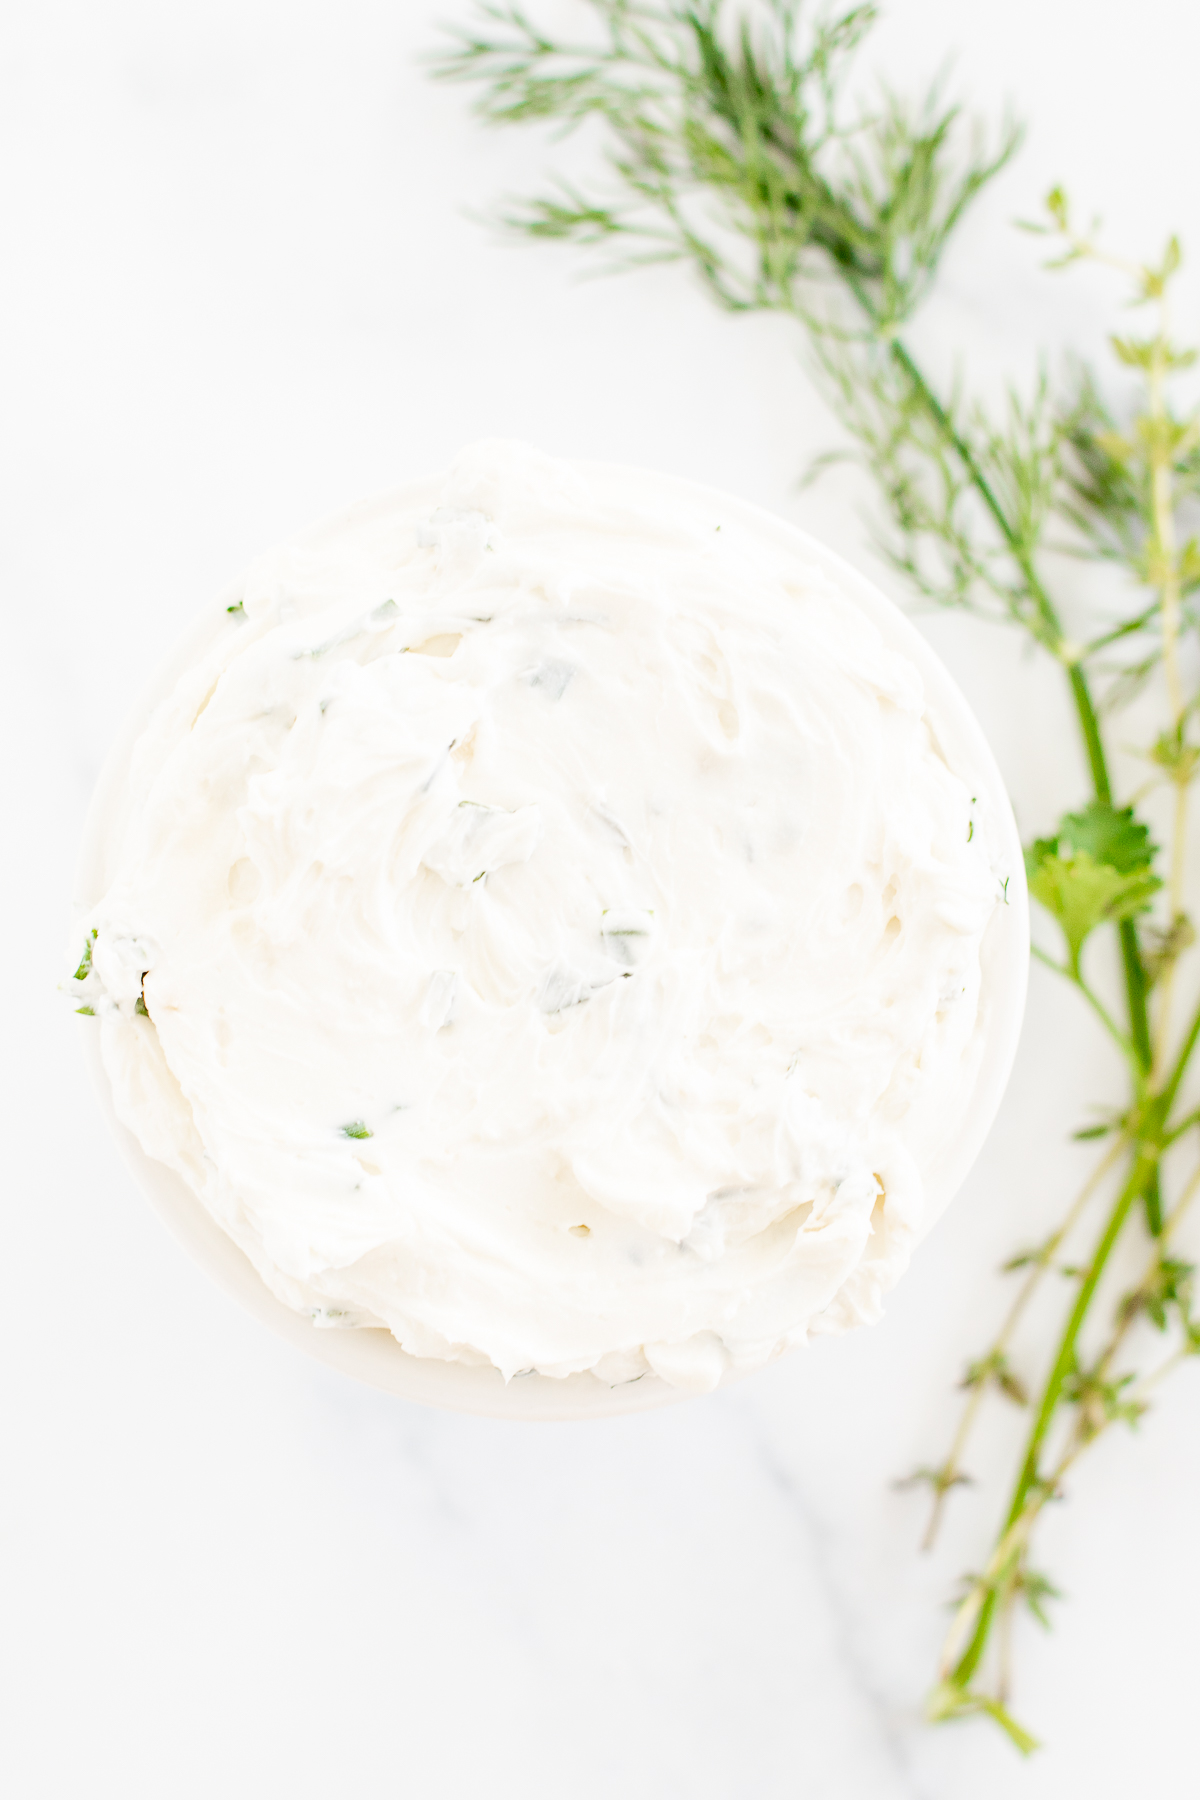 A white bowl of garlic and herb cream cheese on a marble countertop. Fresh herbs nearby.